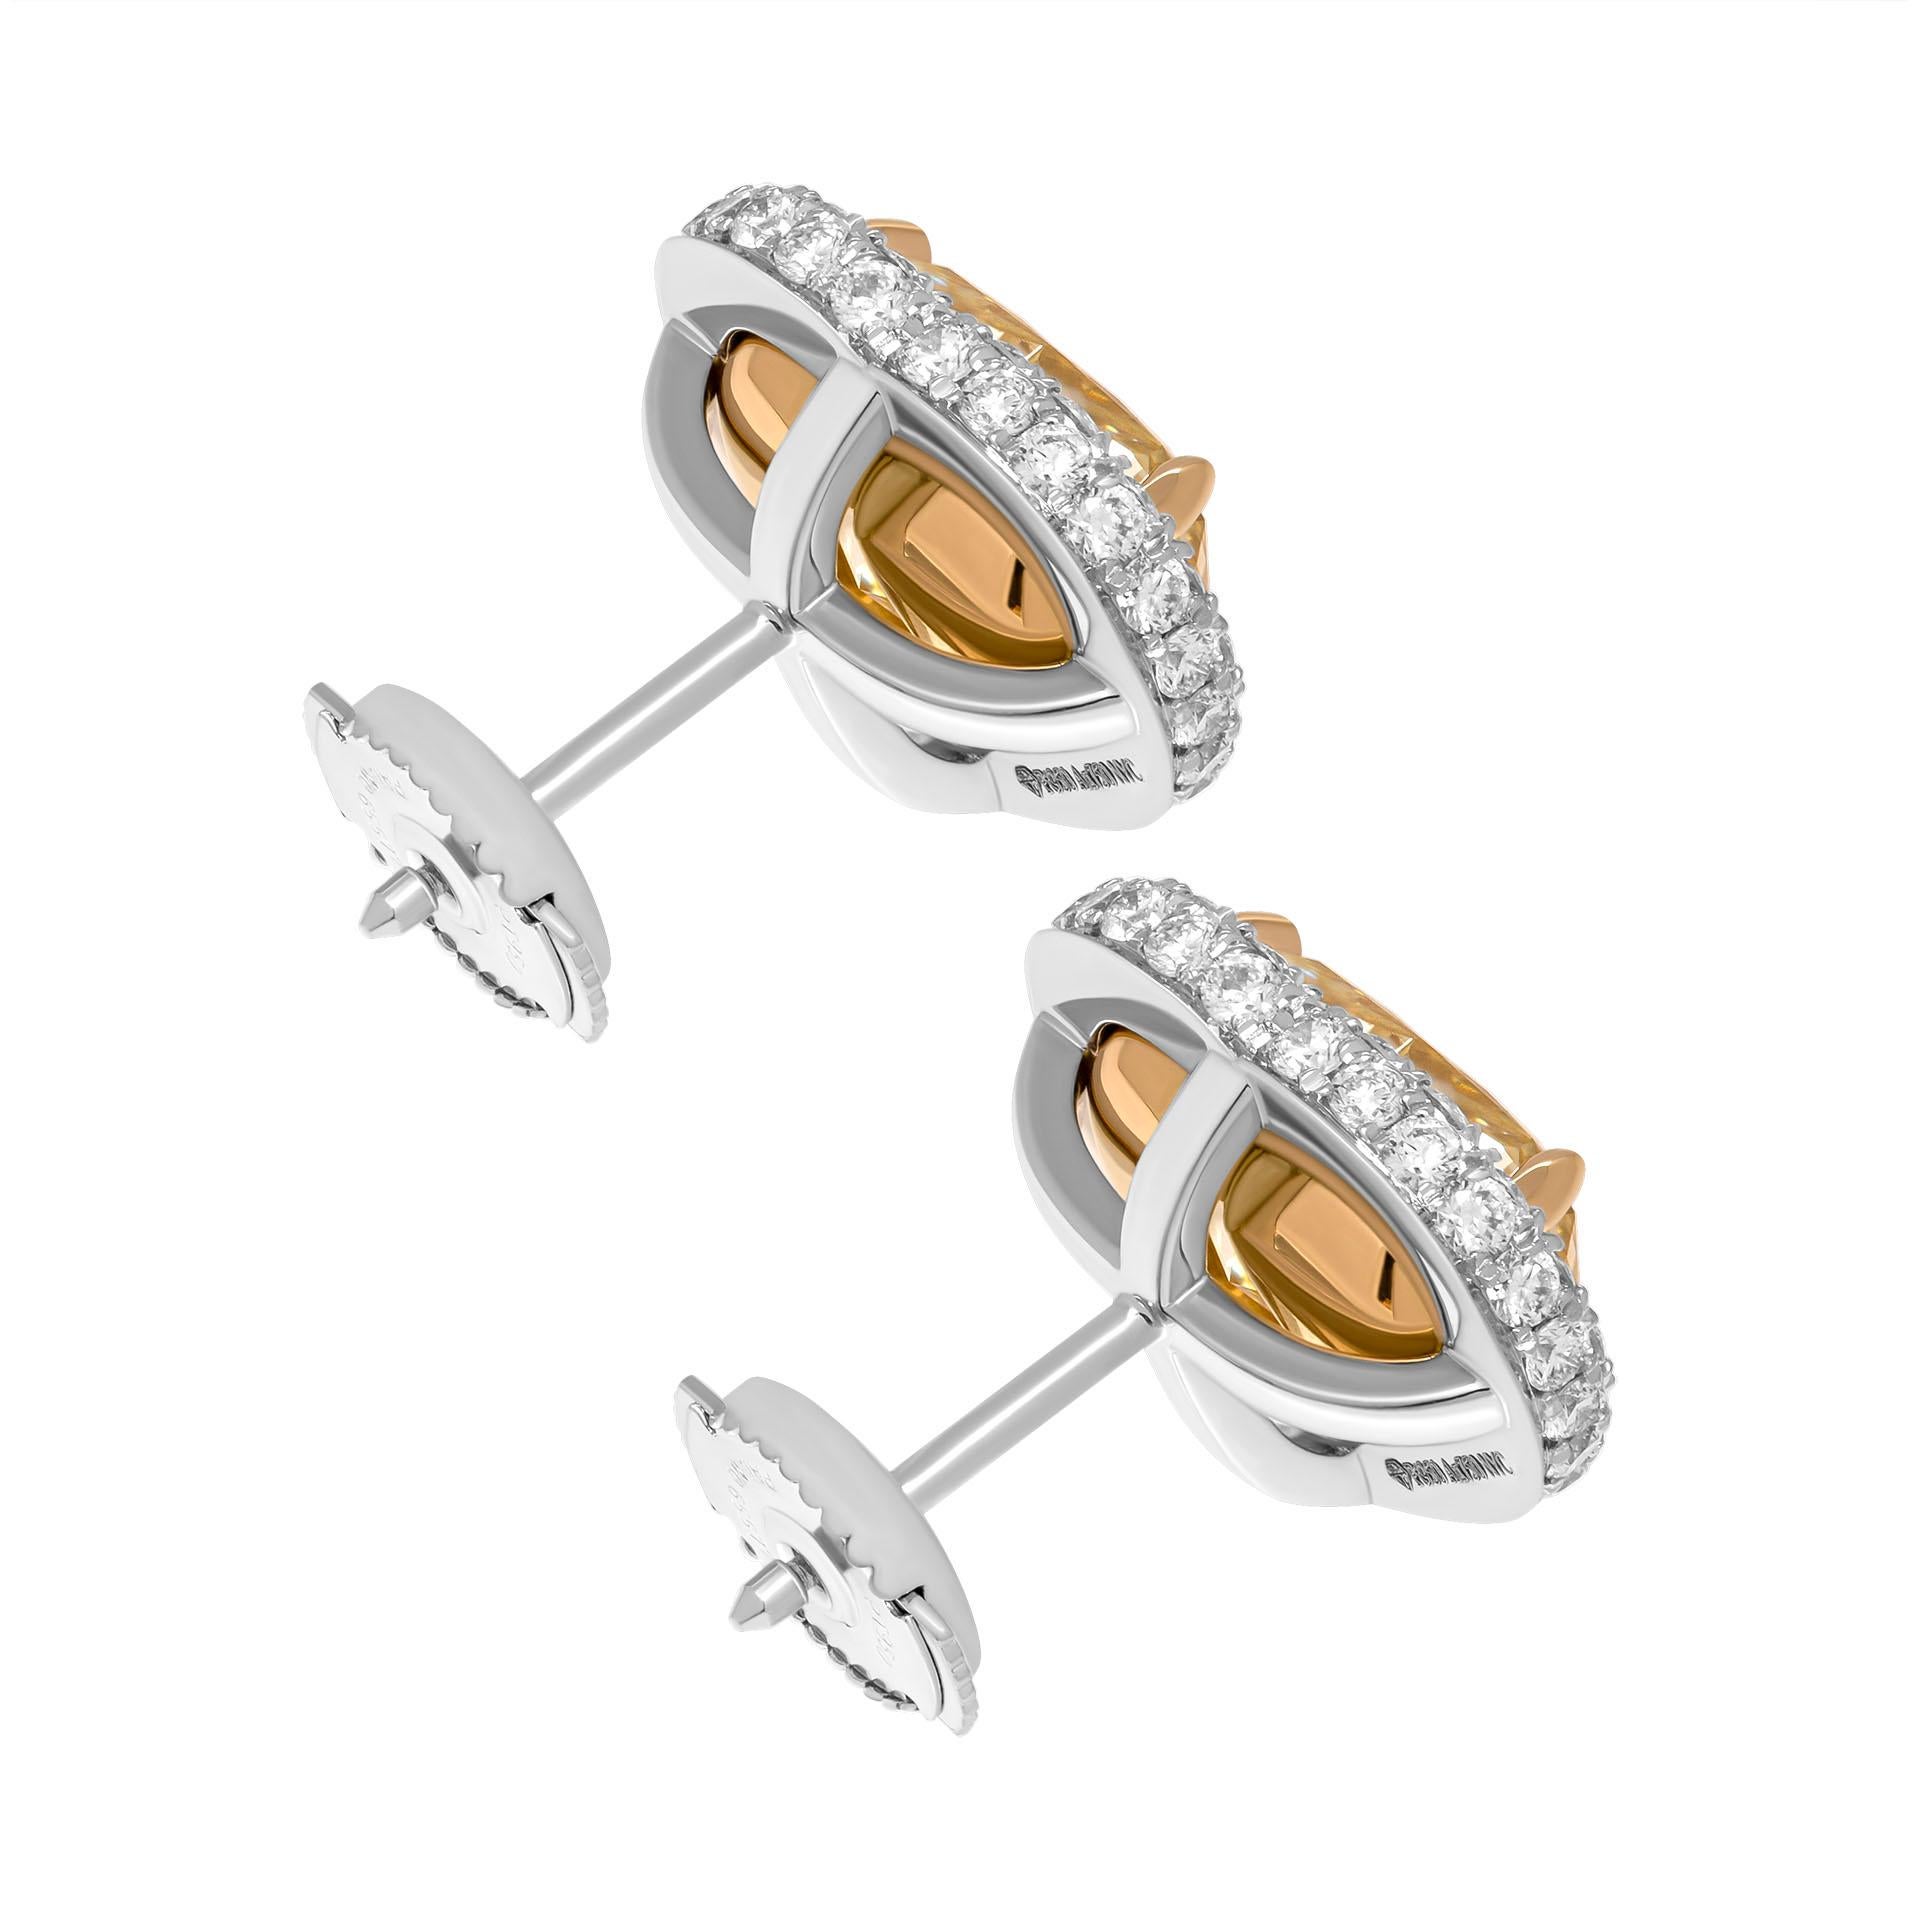 GIA Certified Double edge halo studs earrings in 18K Yellow Gold and Platinum
With 2 Fancy Yellow Heart Shape Diamonds:

2.47ct Natural Fancy Yellow VS1 Heart Shape Diamond GIA#6435264603
2.67ct Natural Fancy Yellow VS1 Heart Shape Diamond